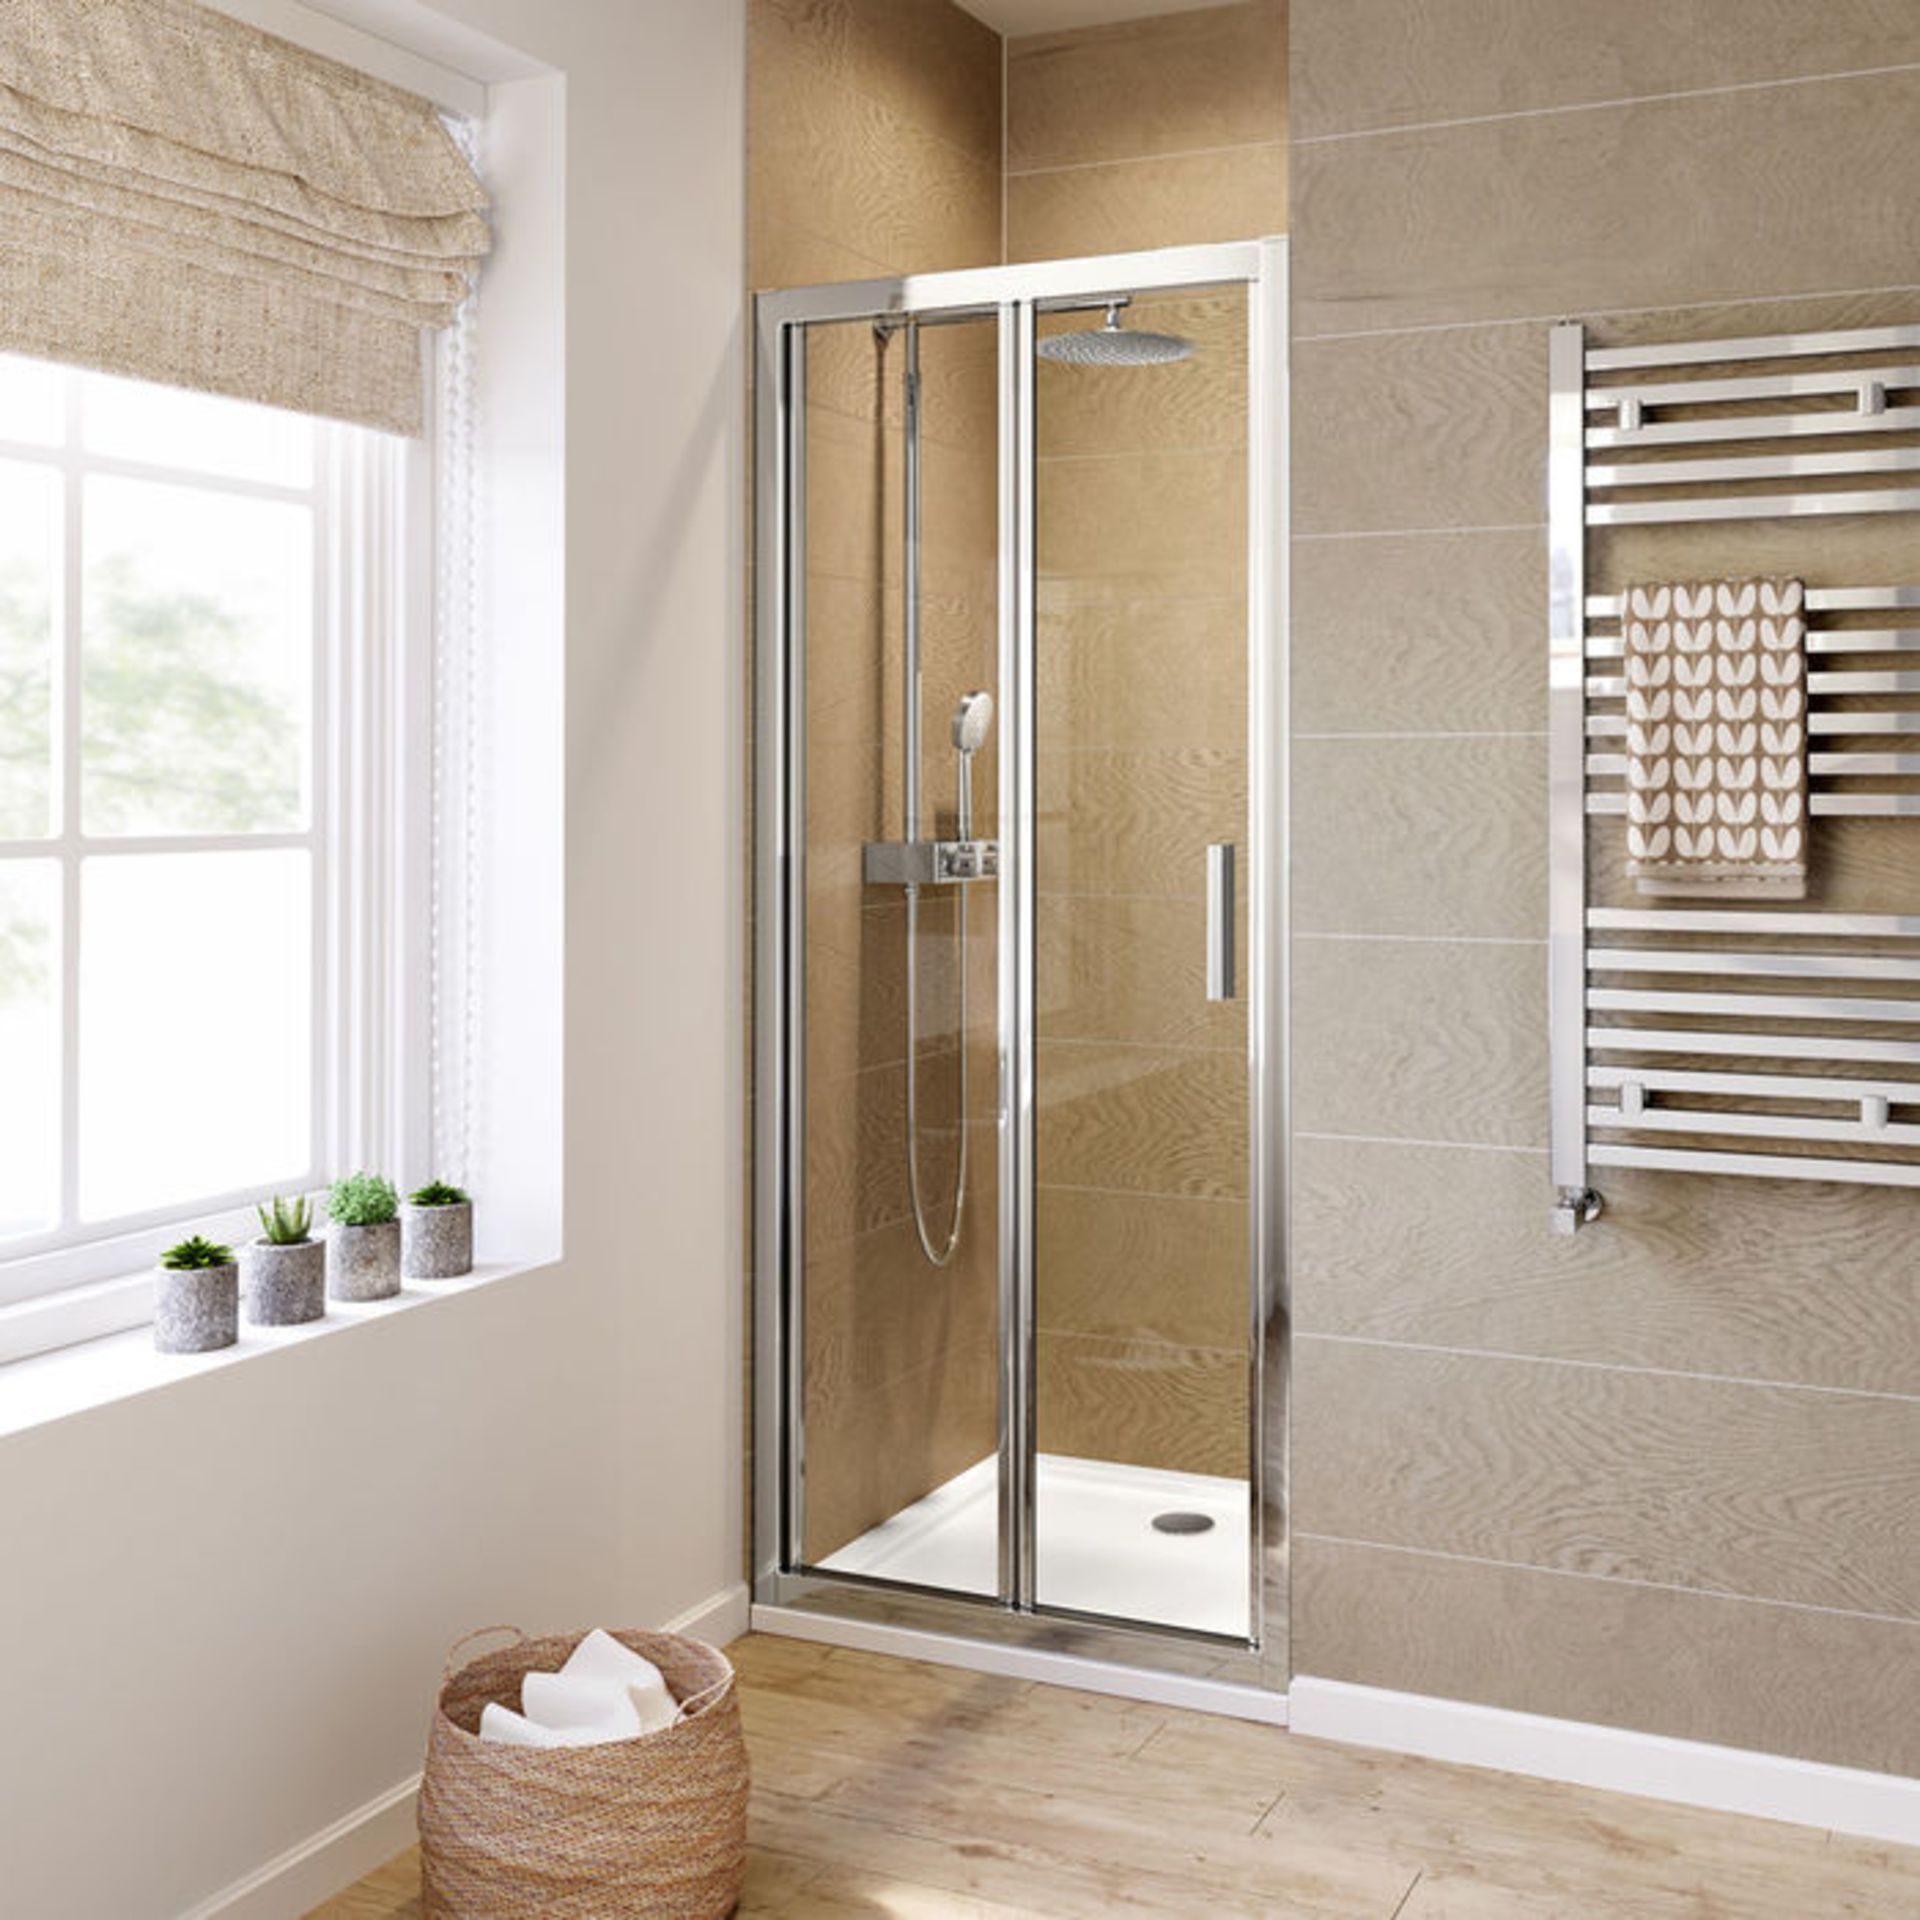 (XM19) 800mm - 6mm - Elements EasyClean Bifold Shower Door. RRP £299.99. 6mm Safety Glass - Single- - Image 2 of 3